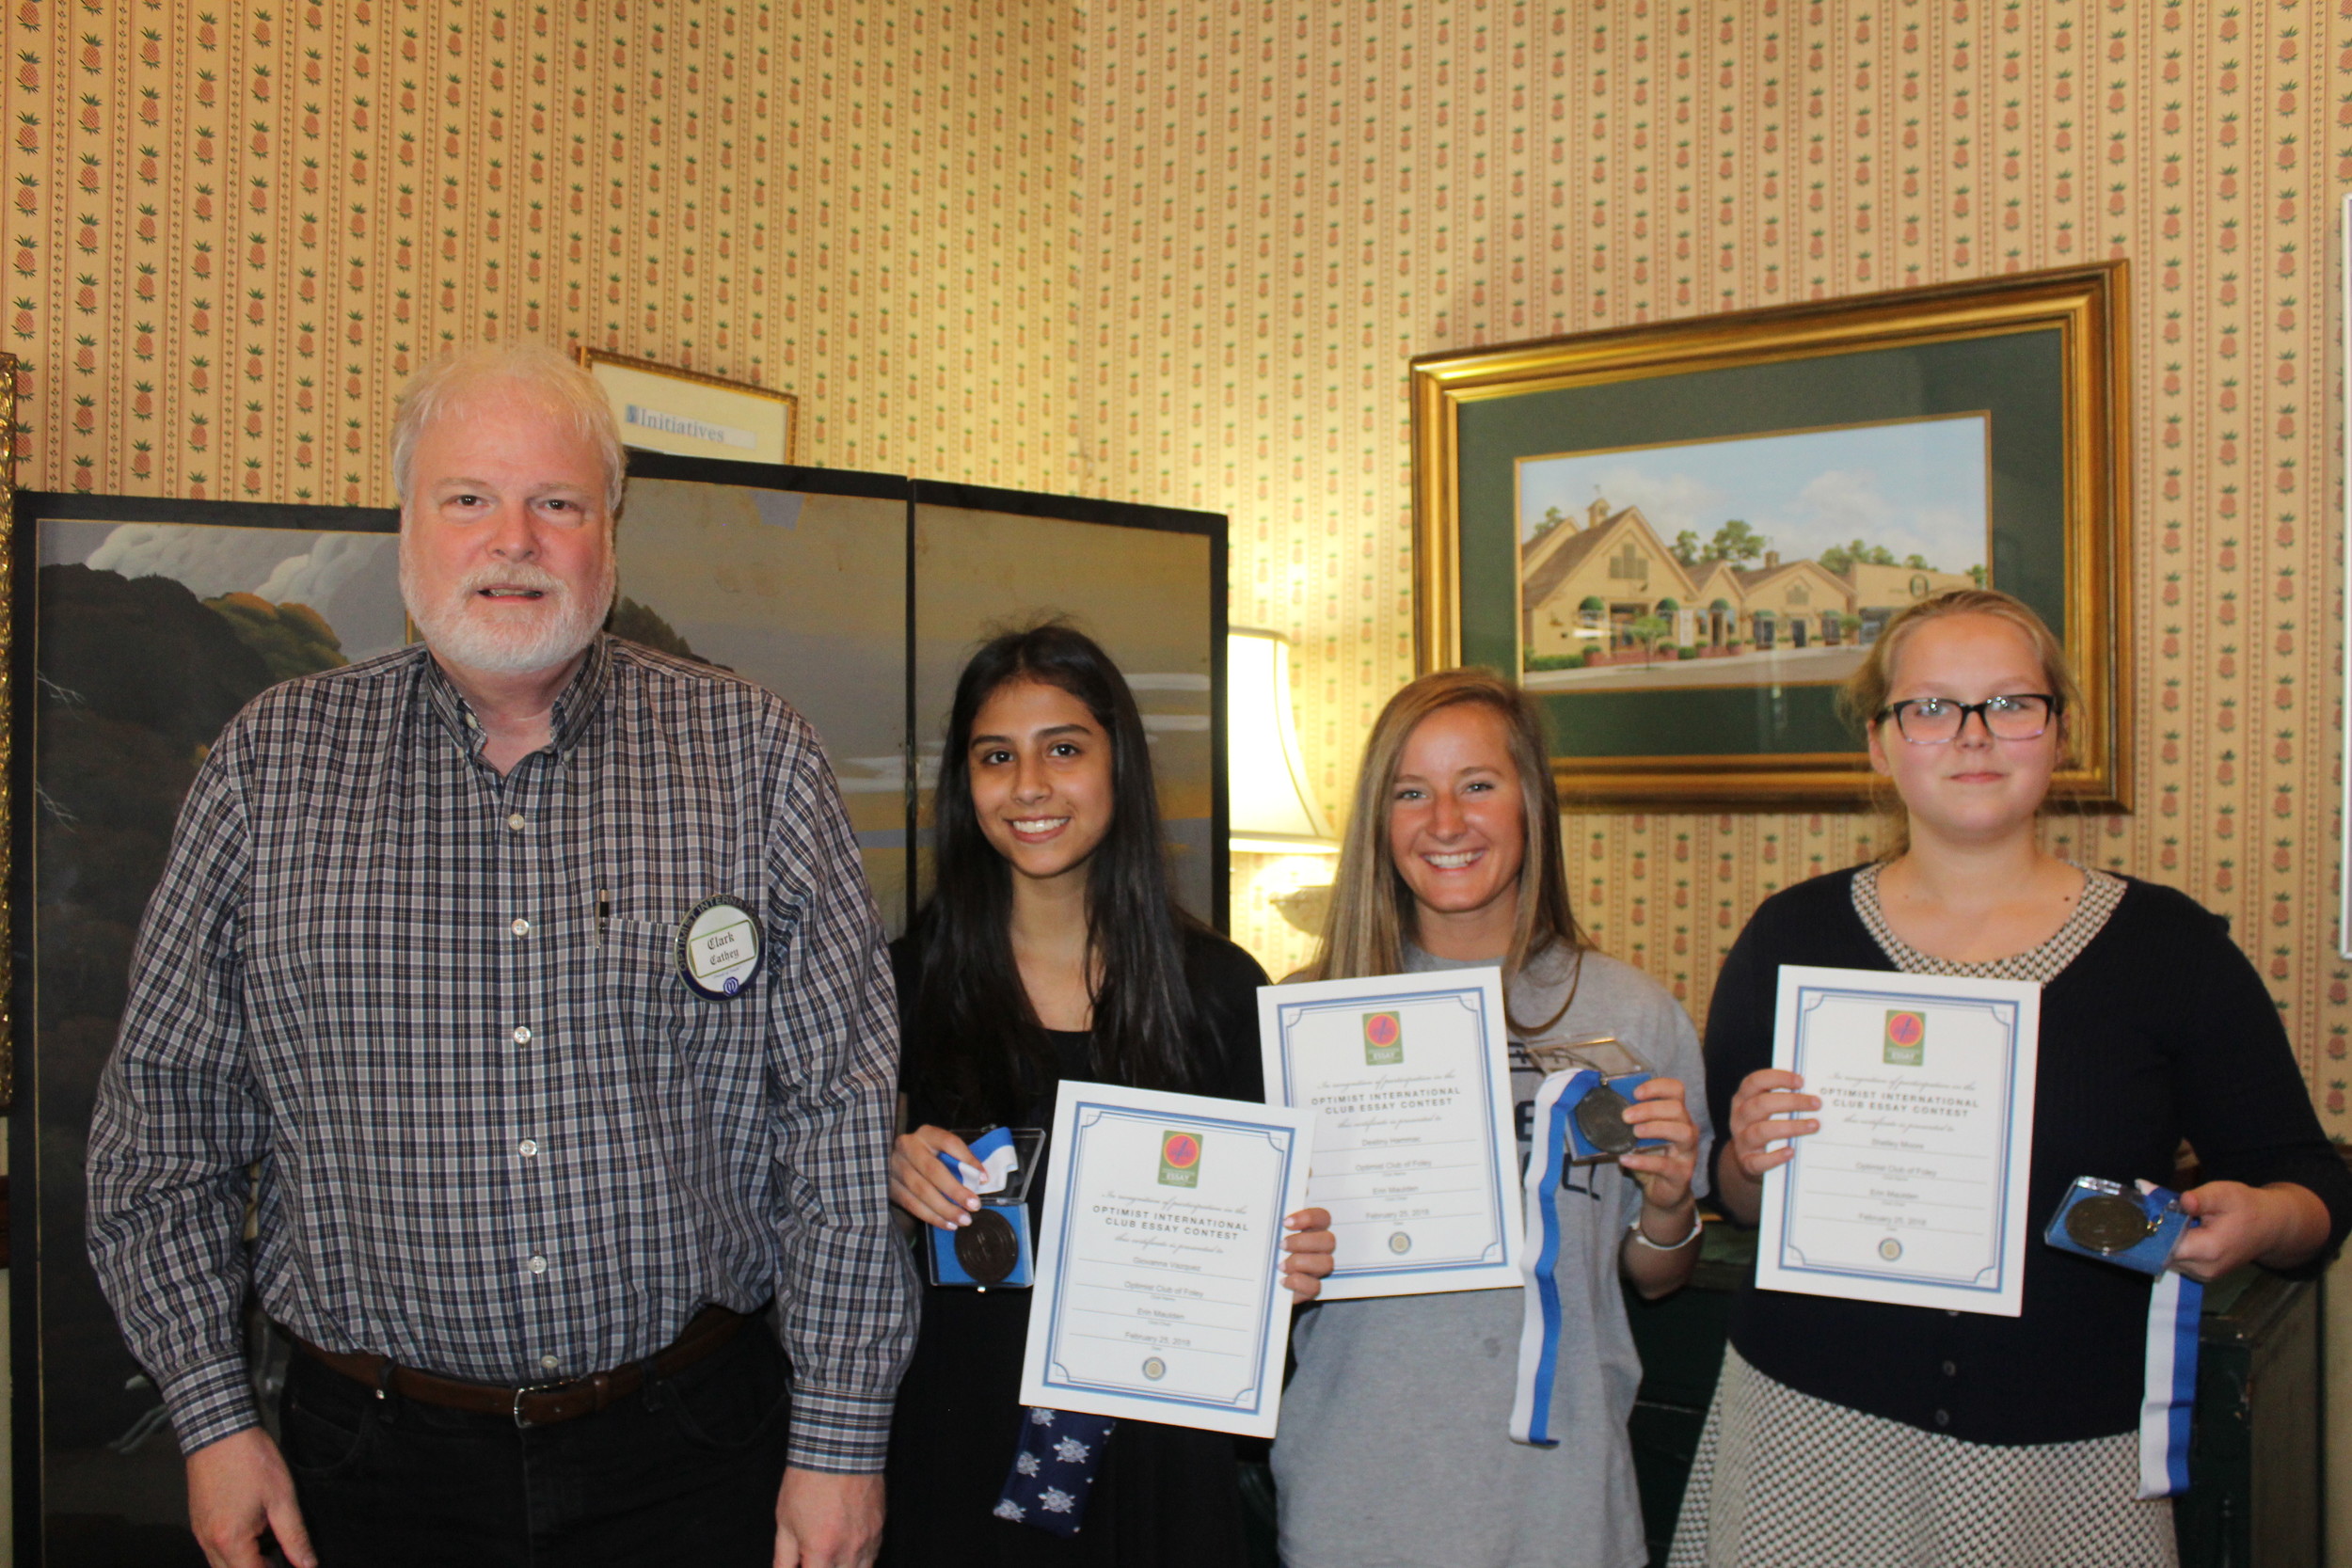 From left to right: Optimist Club President Elect Clark Cathey; 3rd place winner Giovanna Vazquez; 2nd place winner Destiny Hammac; 1st place winner Shelley Moore.